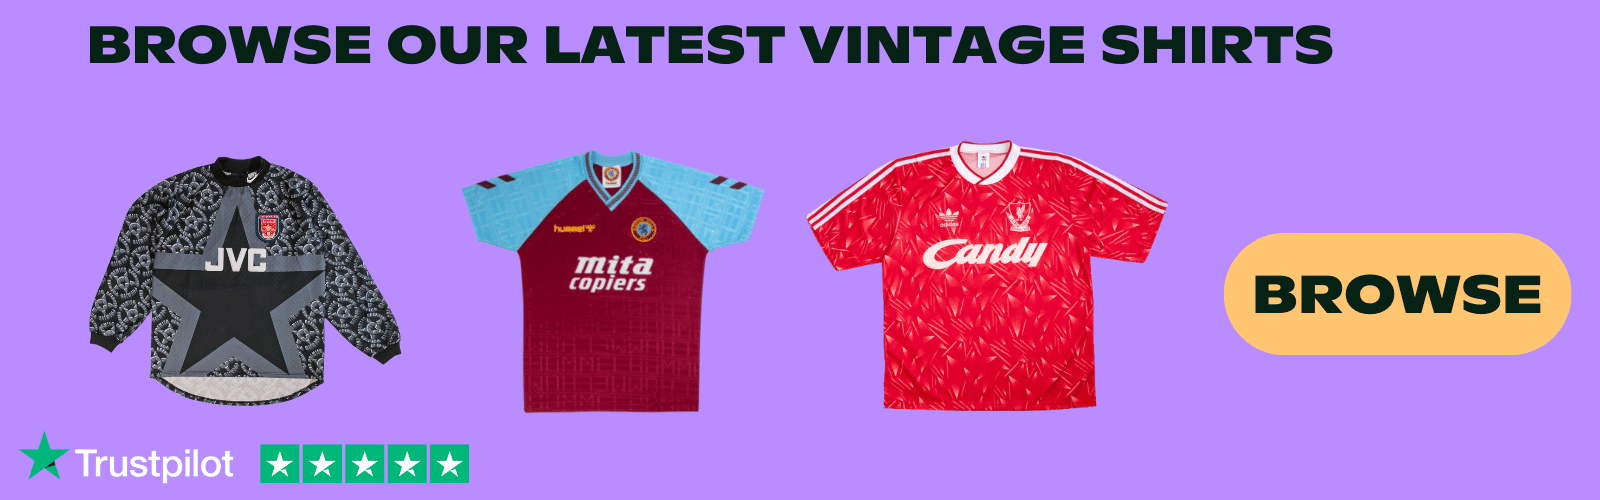 The 20 most expensive football kit grails: Nigeria, Real Madrid, Argentina  and more